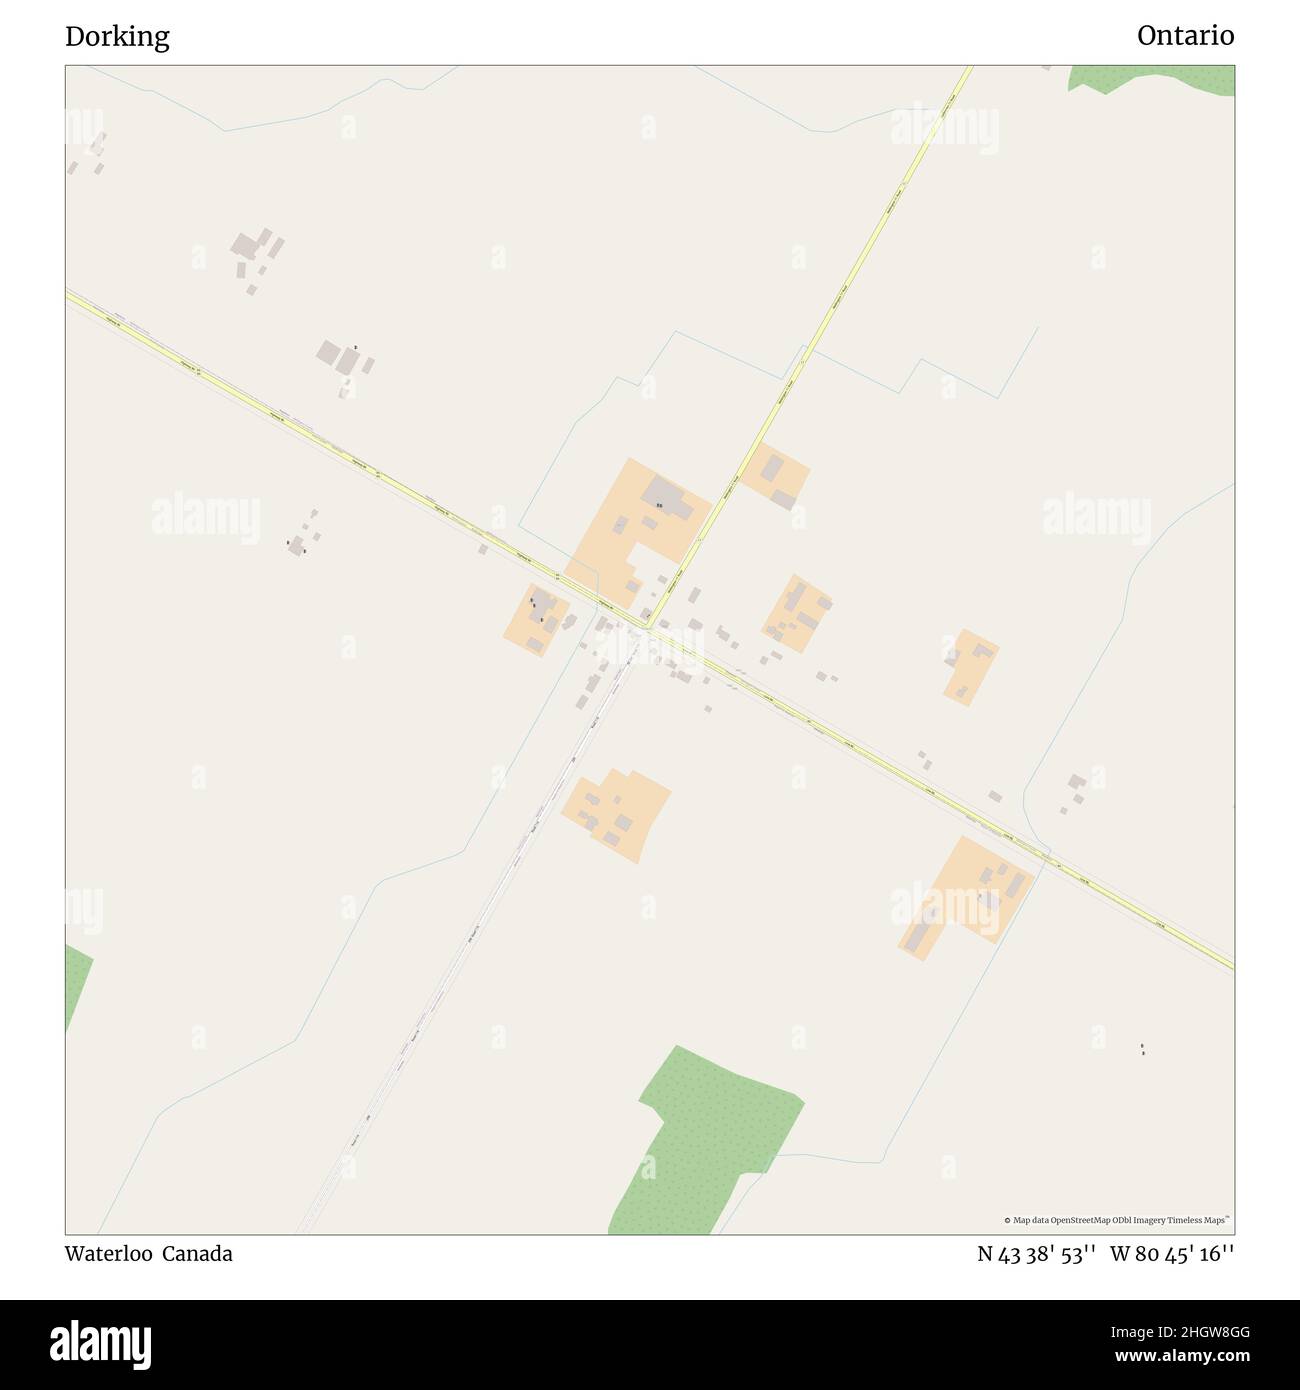 Dorking, Waterloo, Canada, Ontario, N 43 38' 53'', W 80 45' 16'', map, Timeless Map published in 2021. Travelers, explorers and adventurers like Florence Nightingale, David Livingstone, Ernest Shackleton, Lewis and Clark and Sherlock Holmes relied on maps to plan travels to the world's most remote corners, Timeless Maps is mapping most locations on the globe, showing the achievement of great dreams Stock Photo